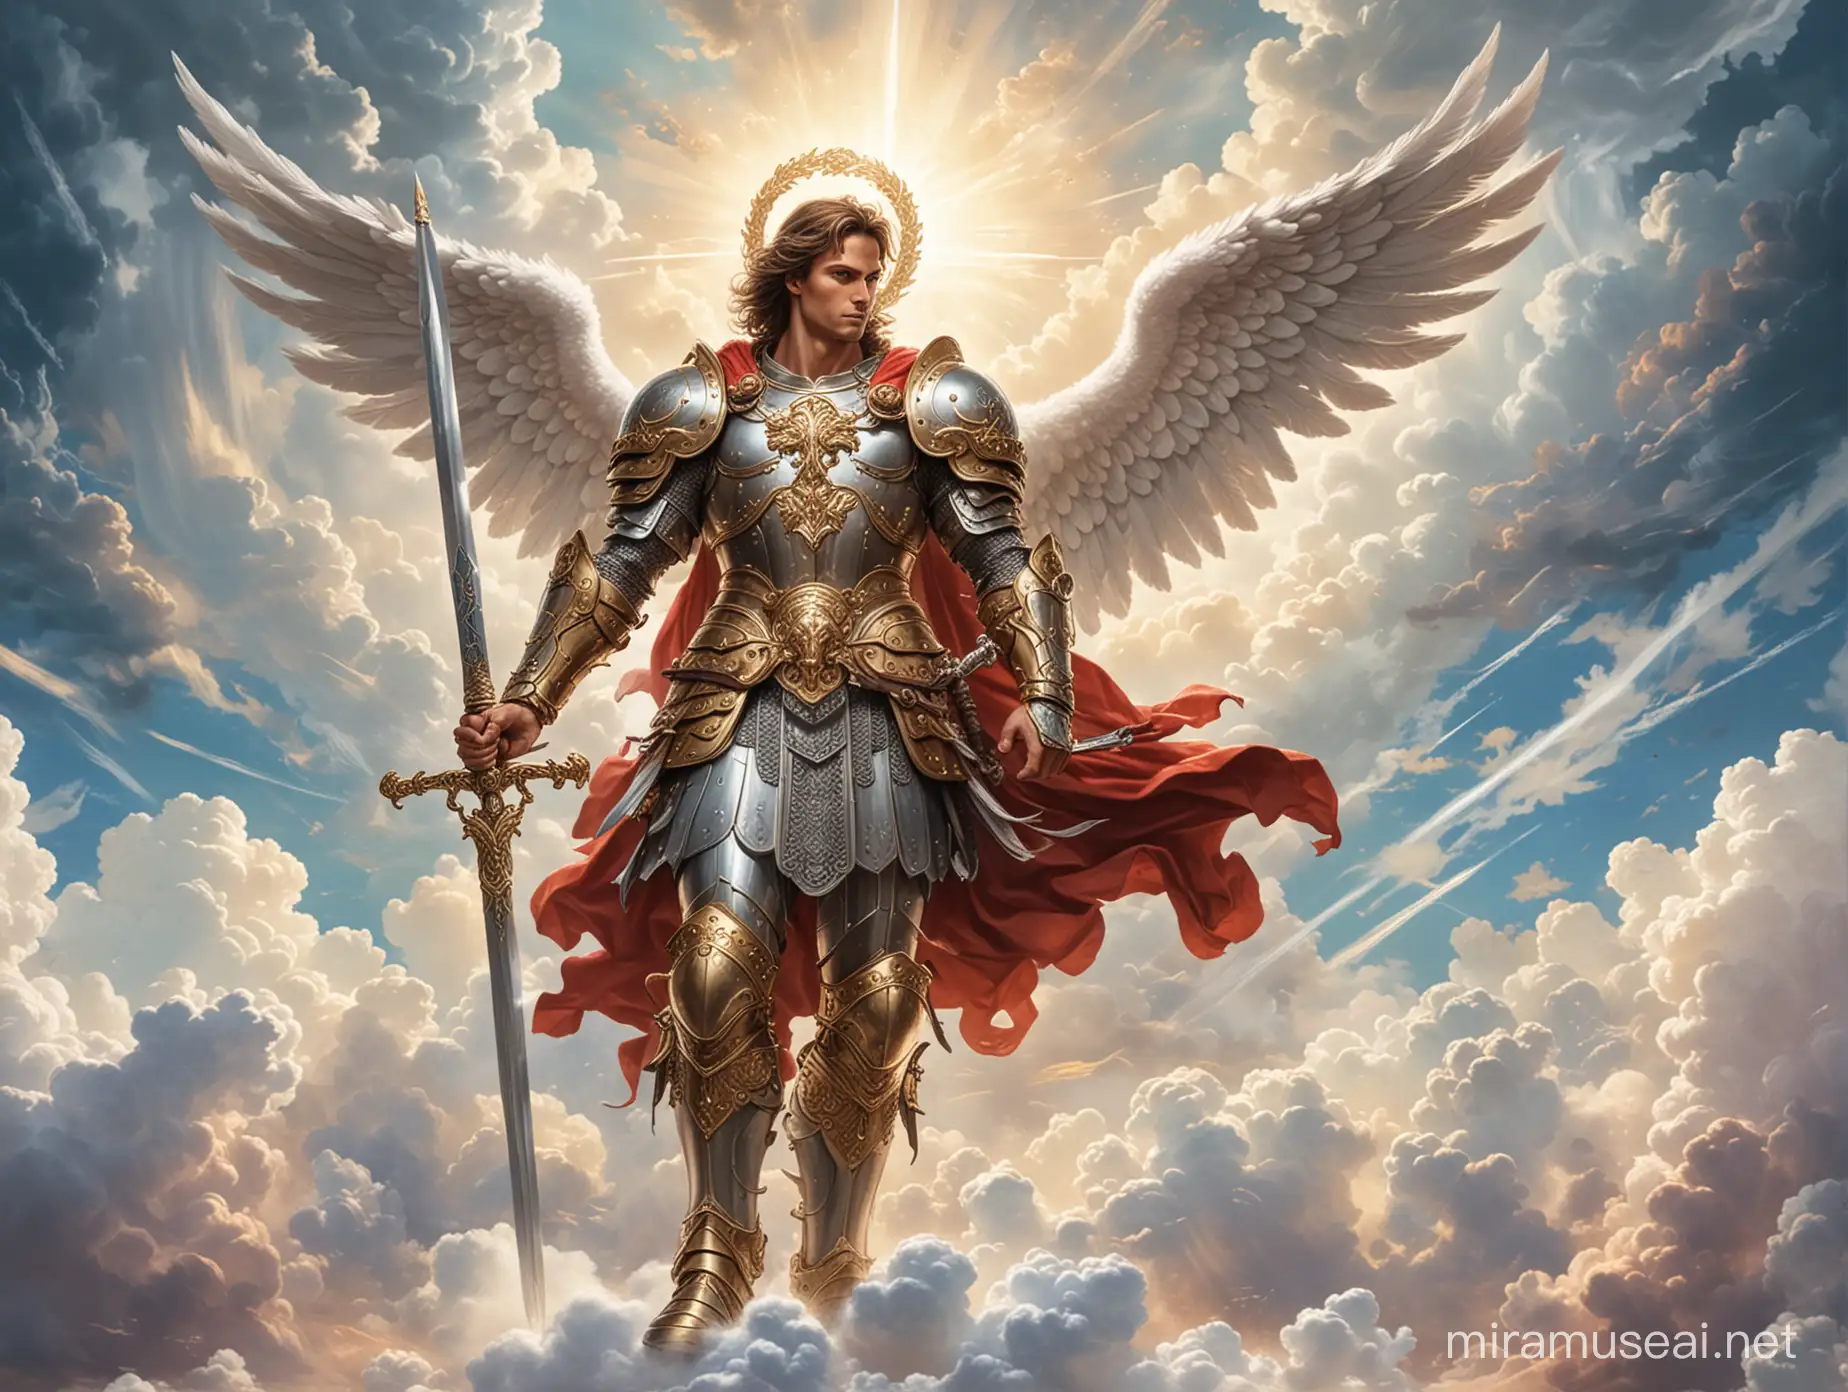 A picture of Saint Michael the Archangel standing dressed in shining armor with his sword drawn amongst fluffy clouds